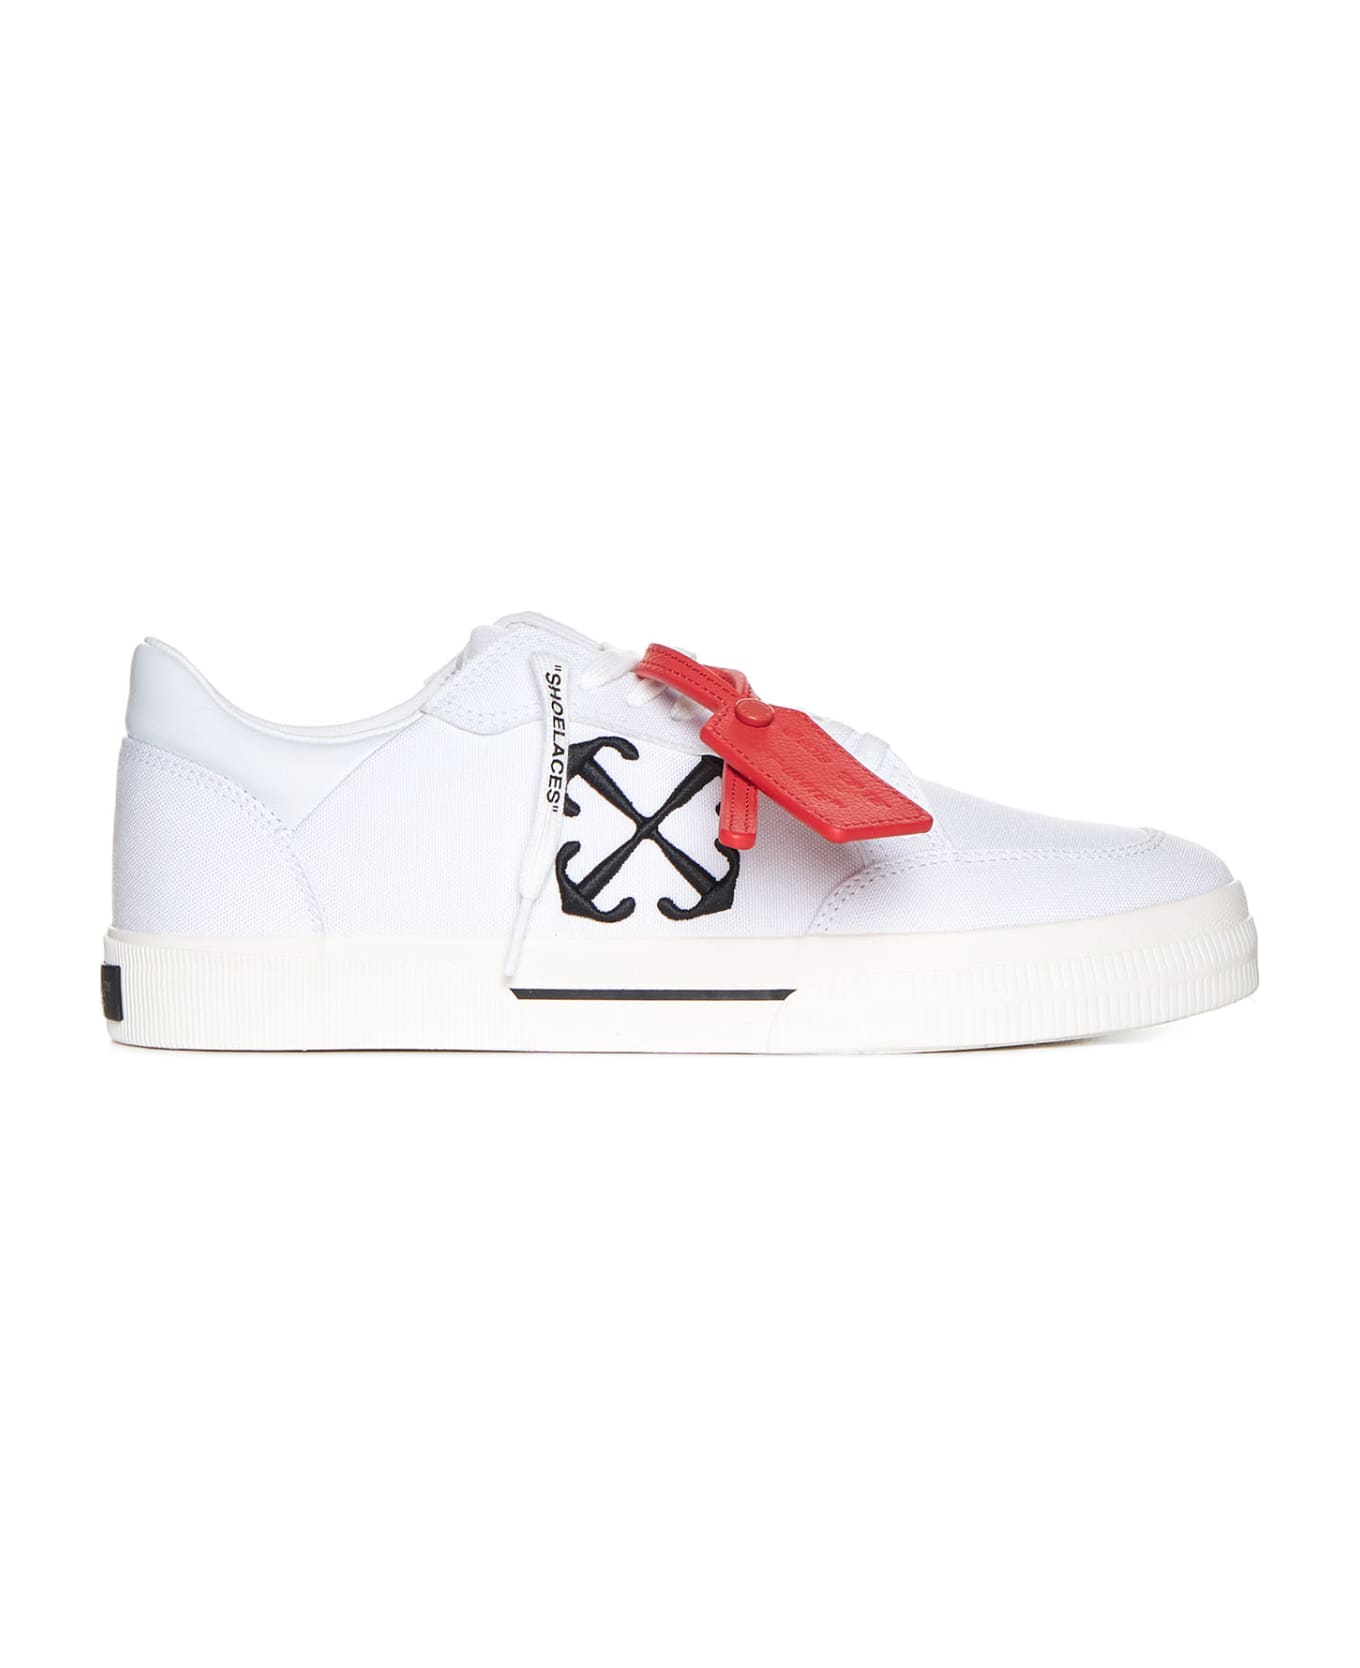 Off-White New Low Vulcanized Canvas Sneakers - White スニーカー